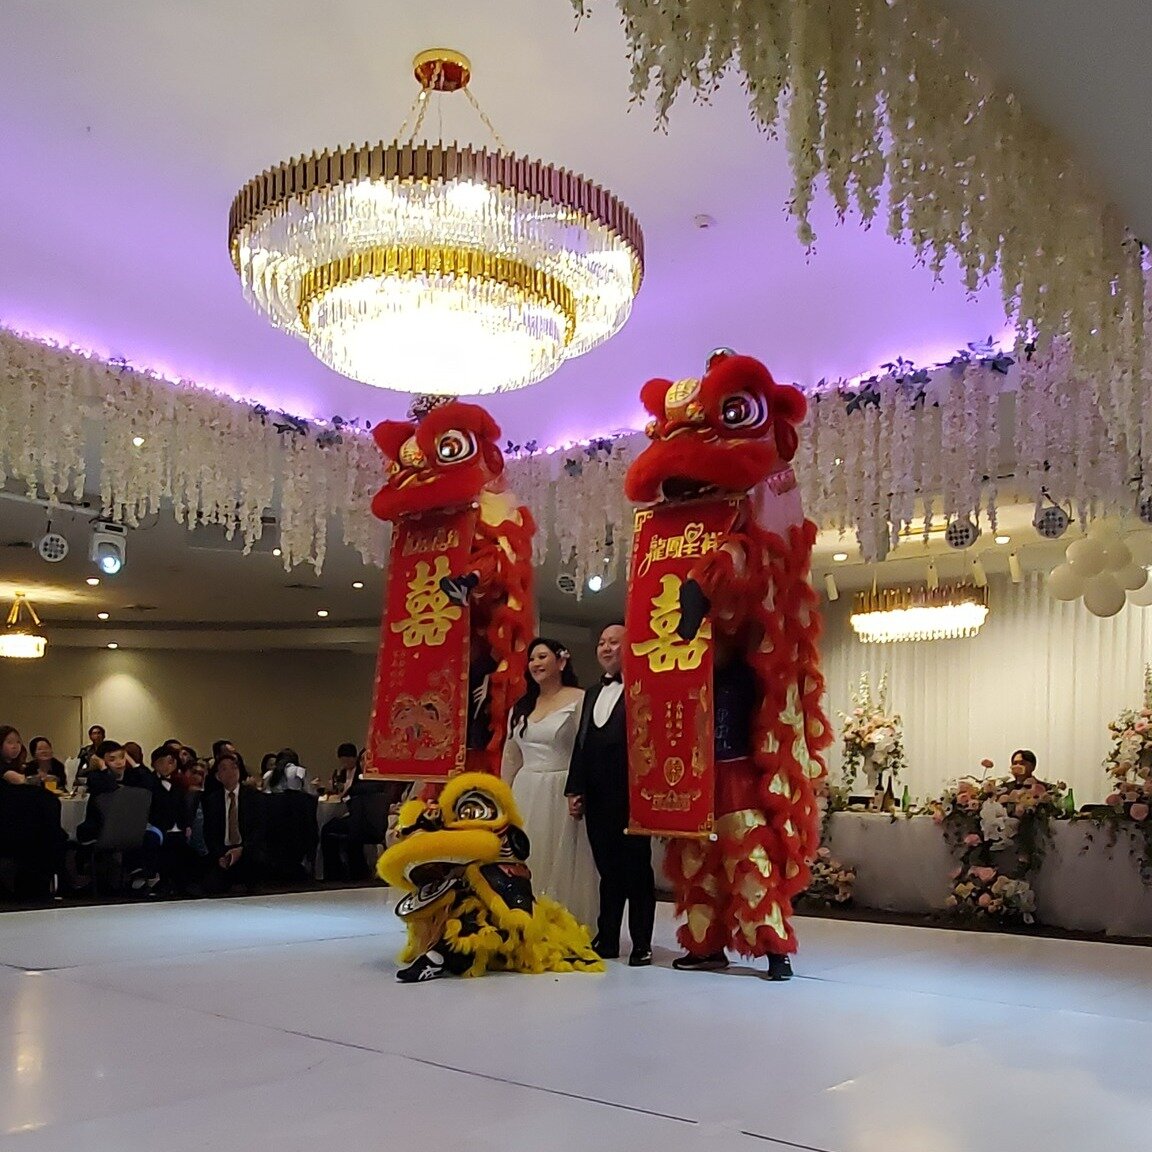 Double tap ❤❤, if you also love a touch of culture in weddings.

It&rsquo;s quite common to have lion dancing as part of the Asian wedding reception. Having a lion dance at weddings blesses the couple so that they have a long and happy marriage, as w